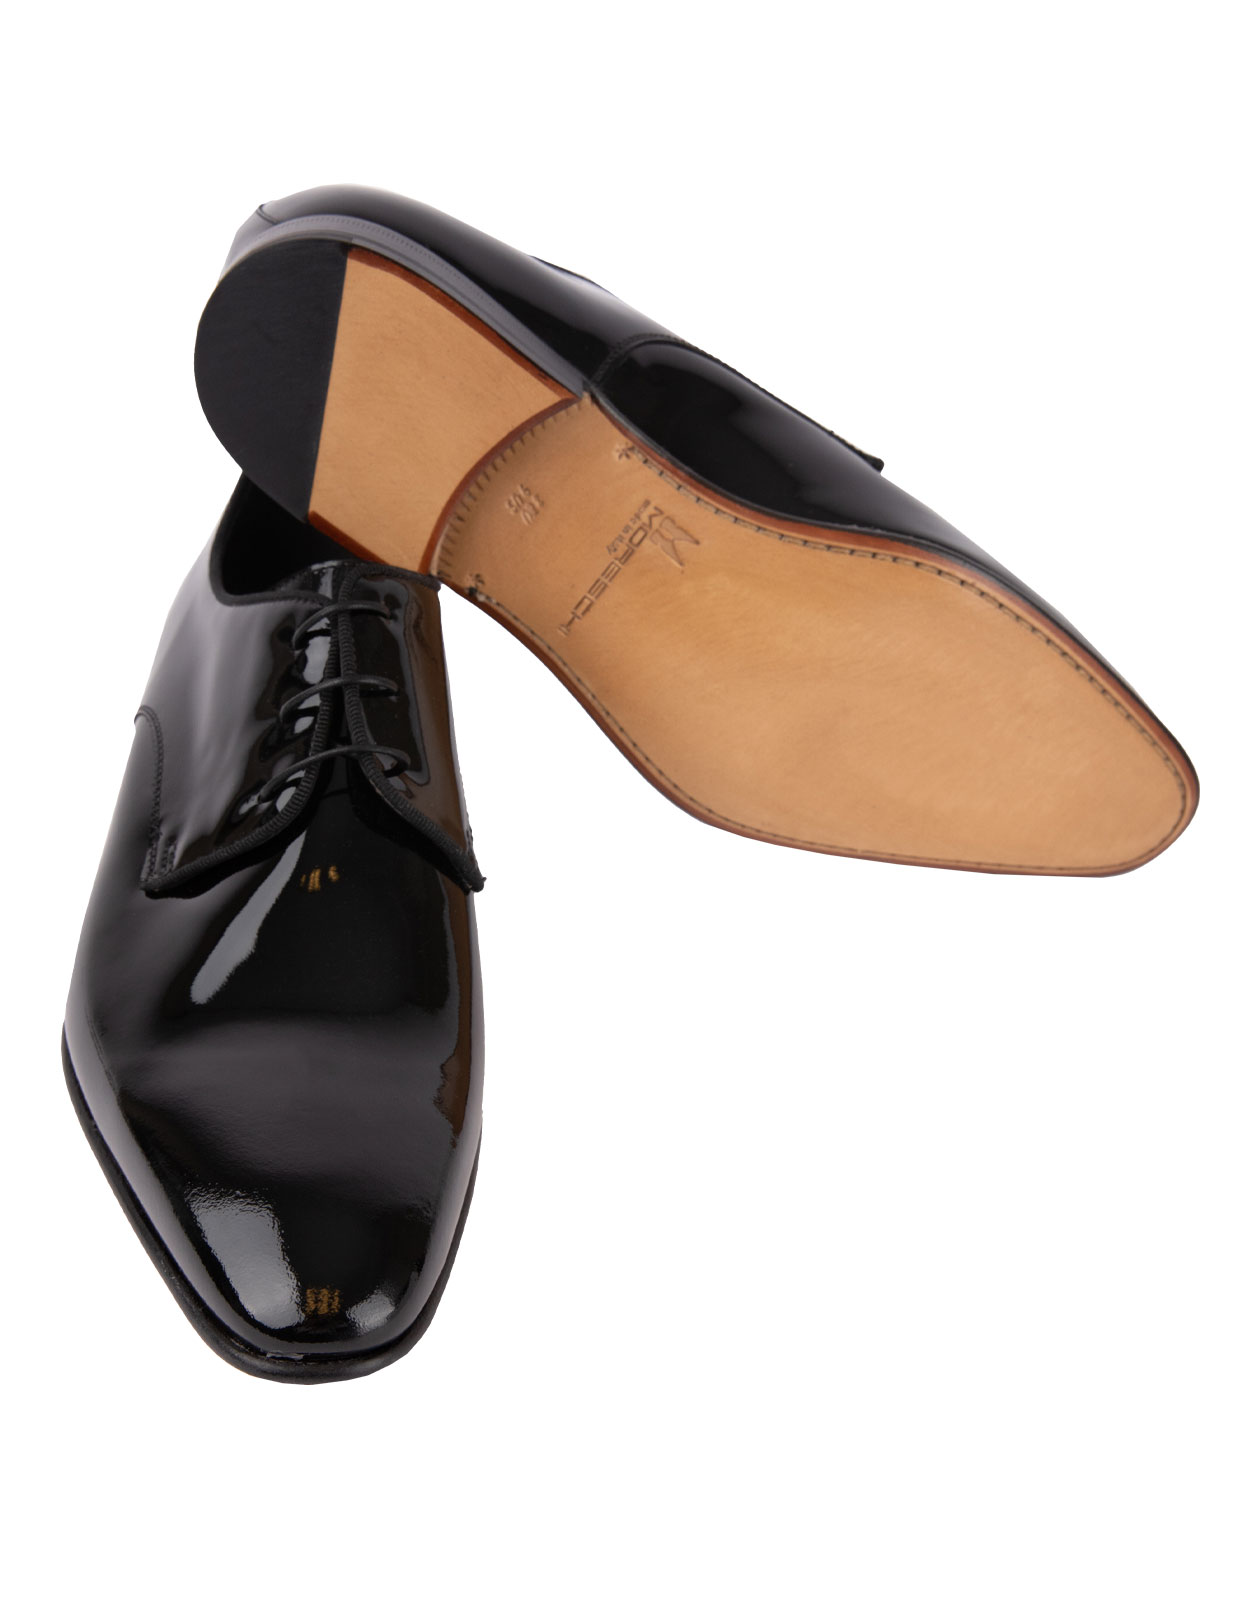 Lille Patent Leather Derby Shoes Black Stl 9.5